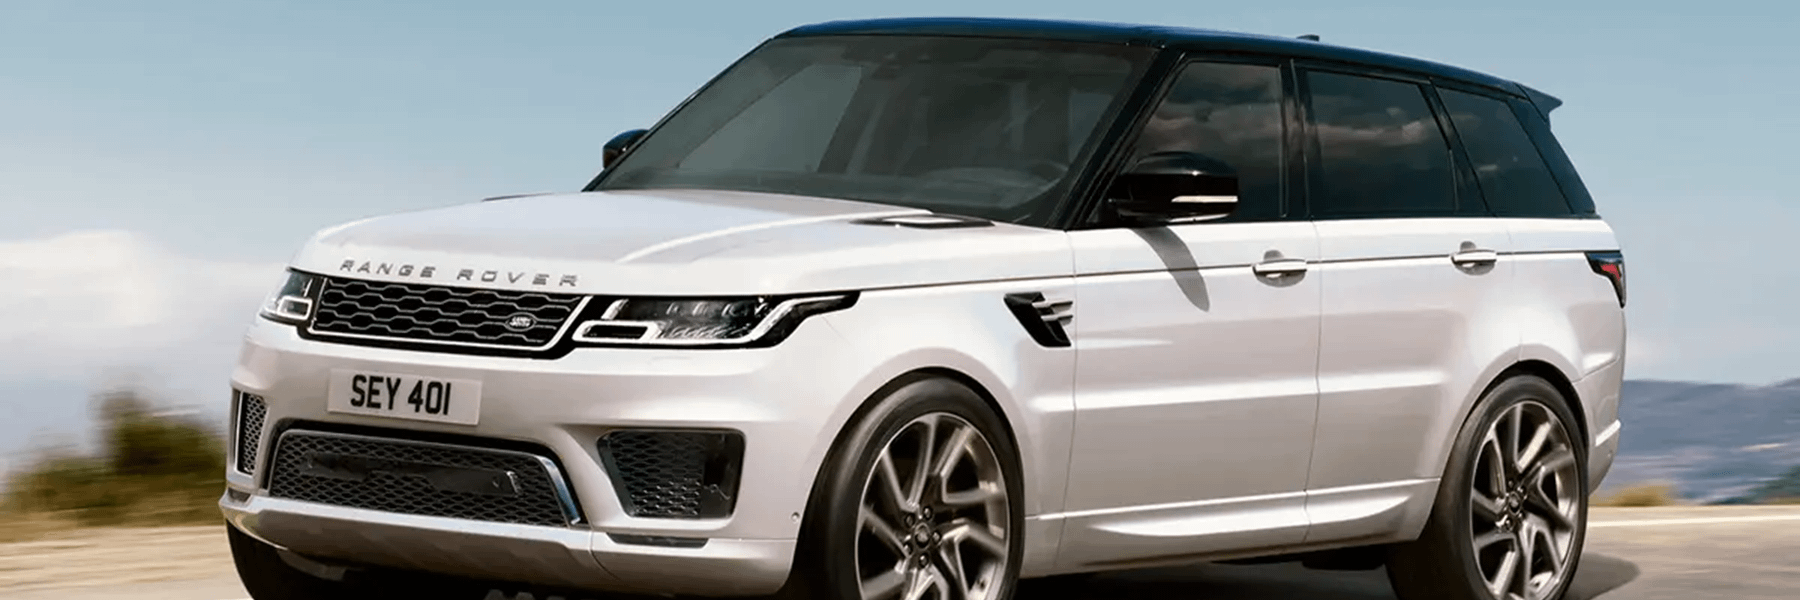 Does Land Rover Give Discounts